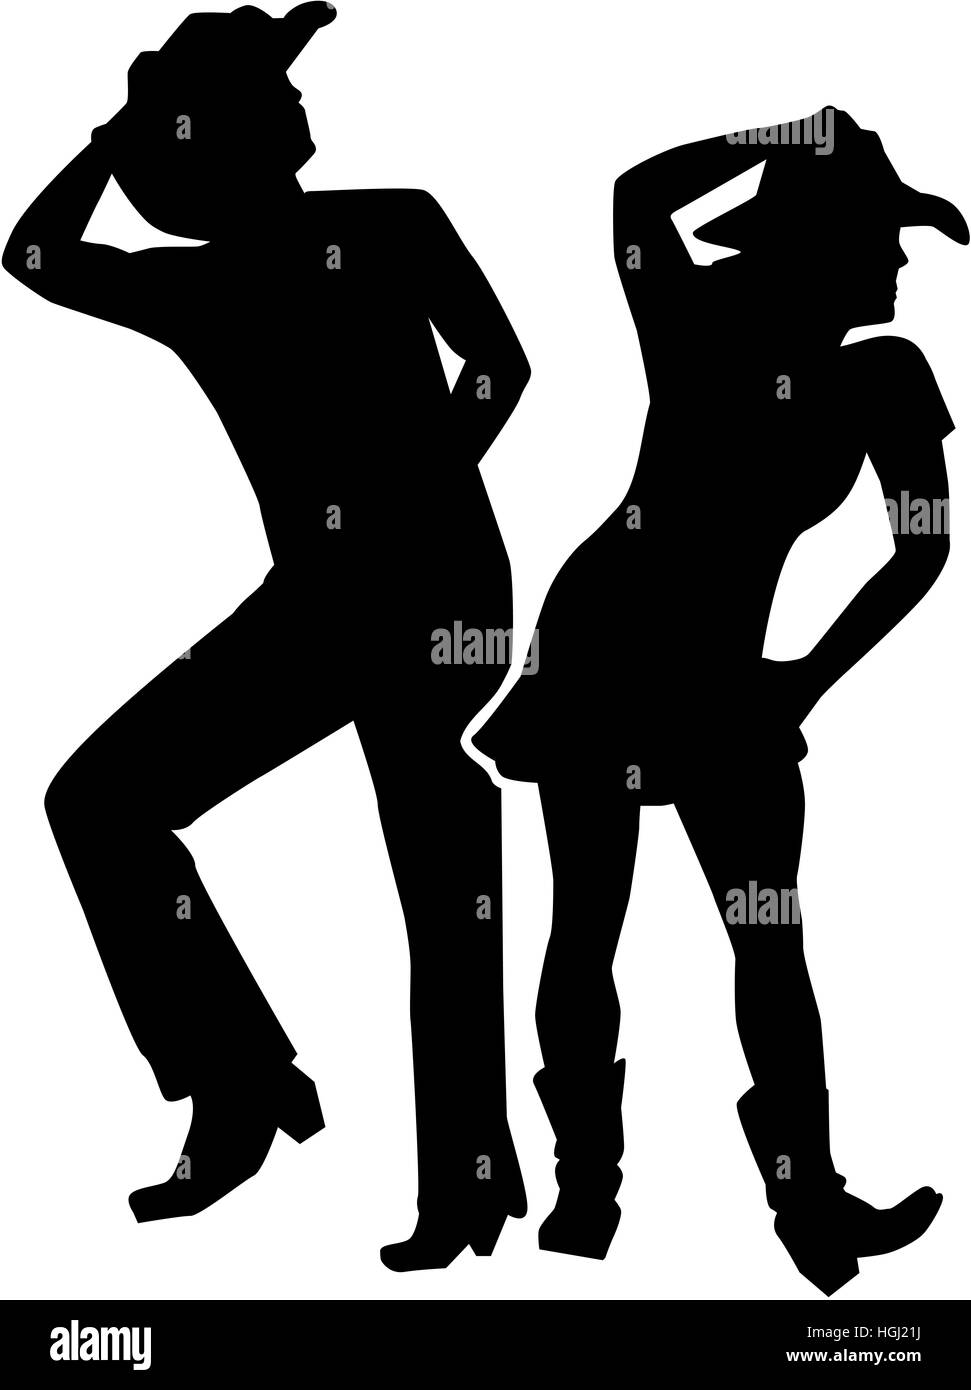 Line dancing silhouette man and woman Stock Photo